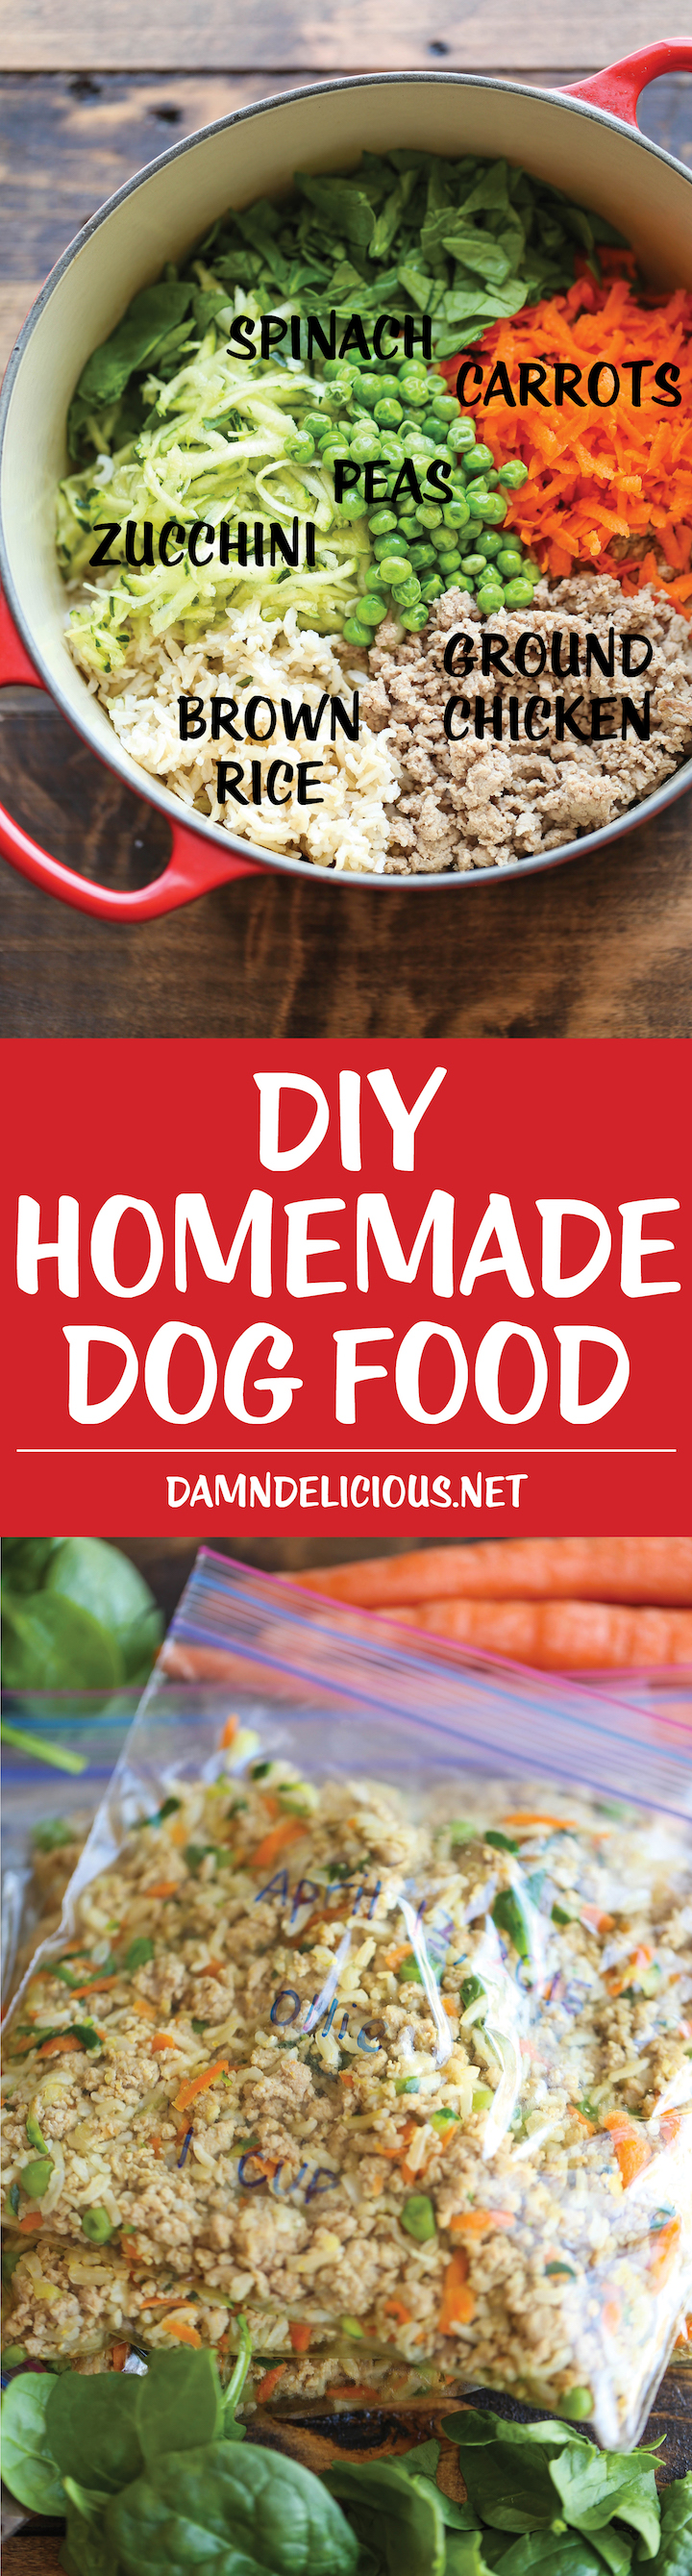 21 Healthy Homemade Dog Food and Treat Recipes Perfect for ...